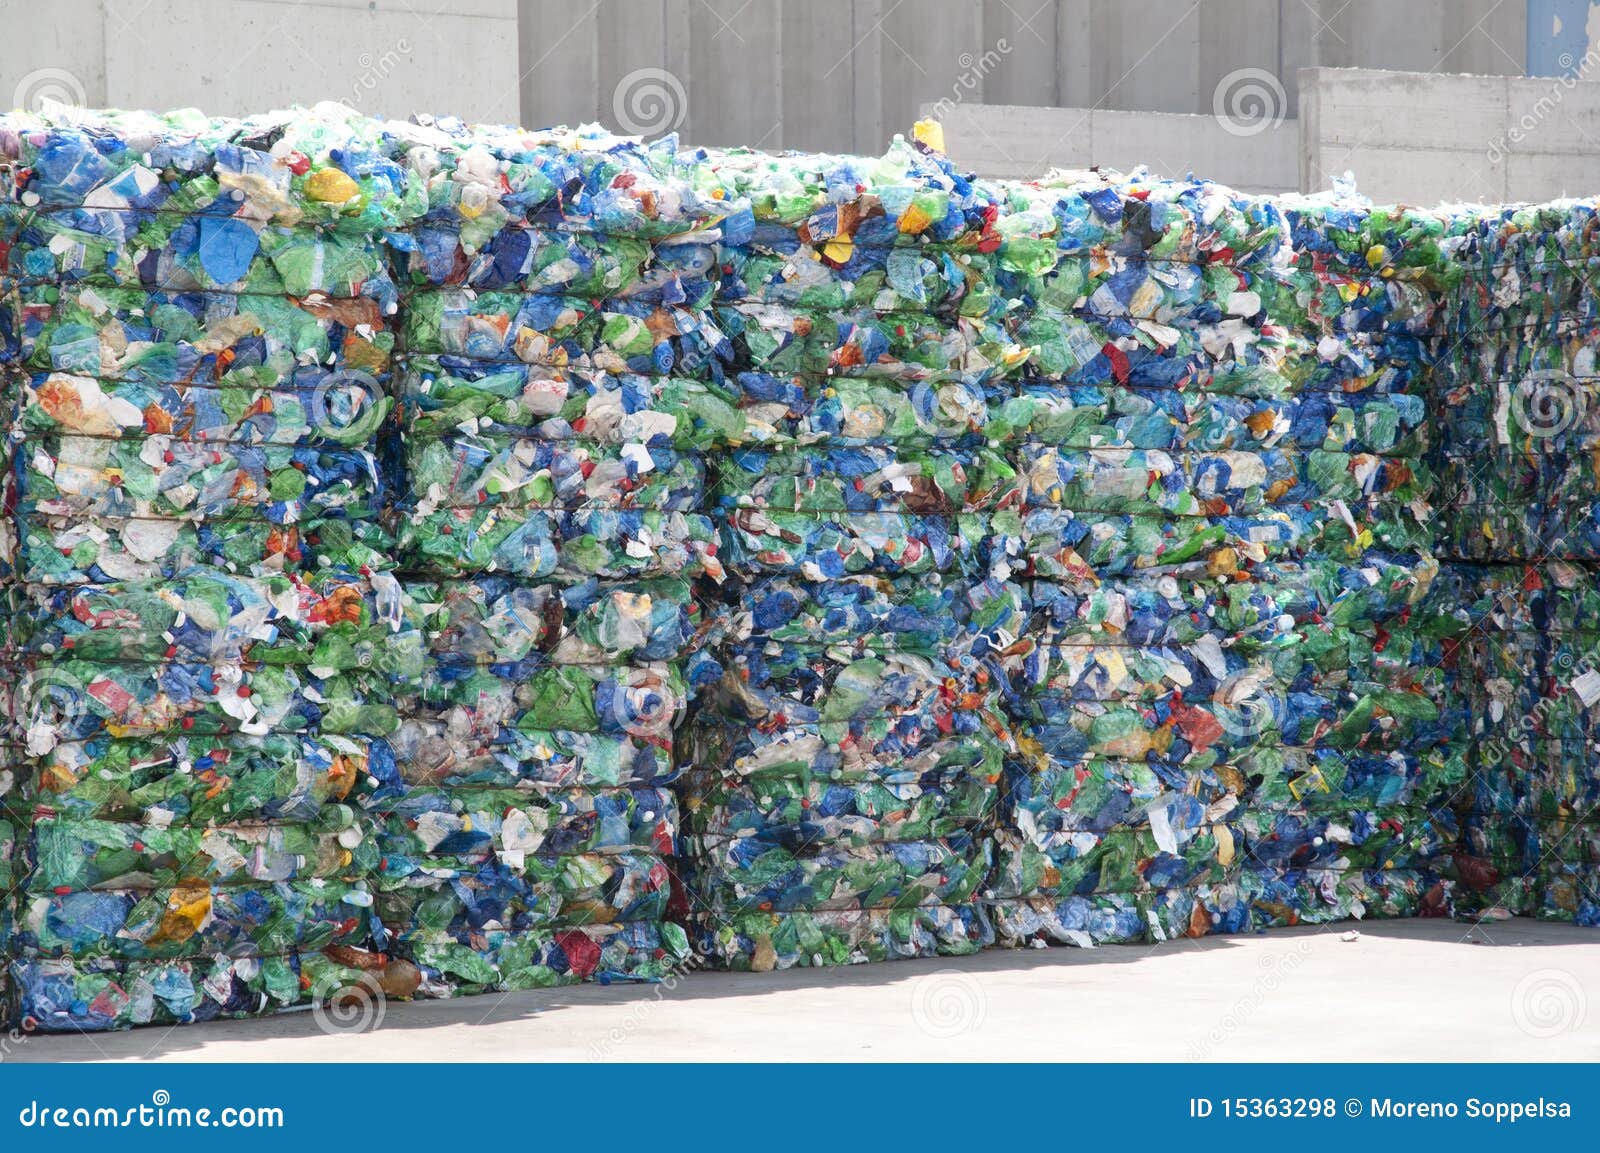 plastic recycling - waste